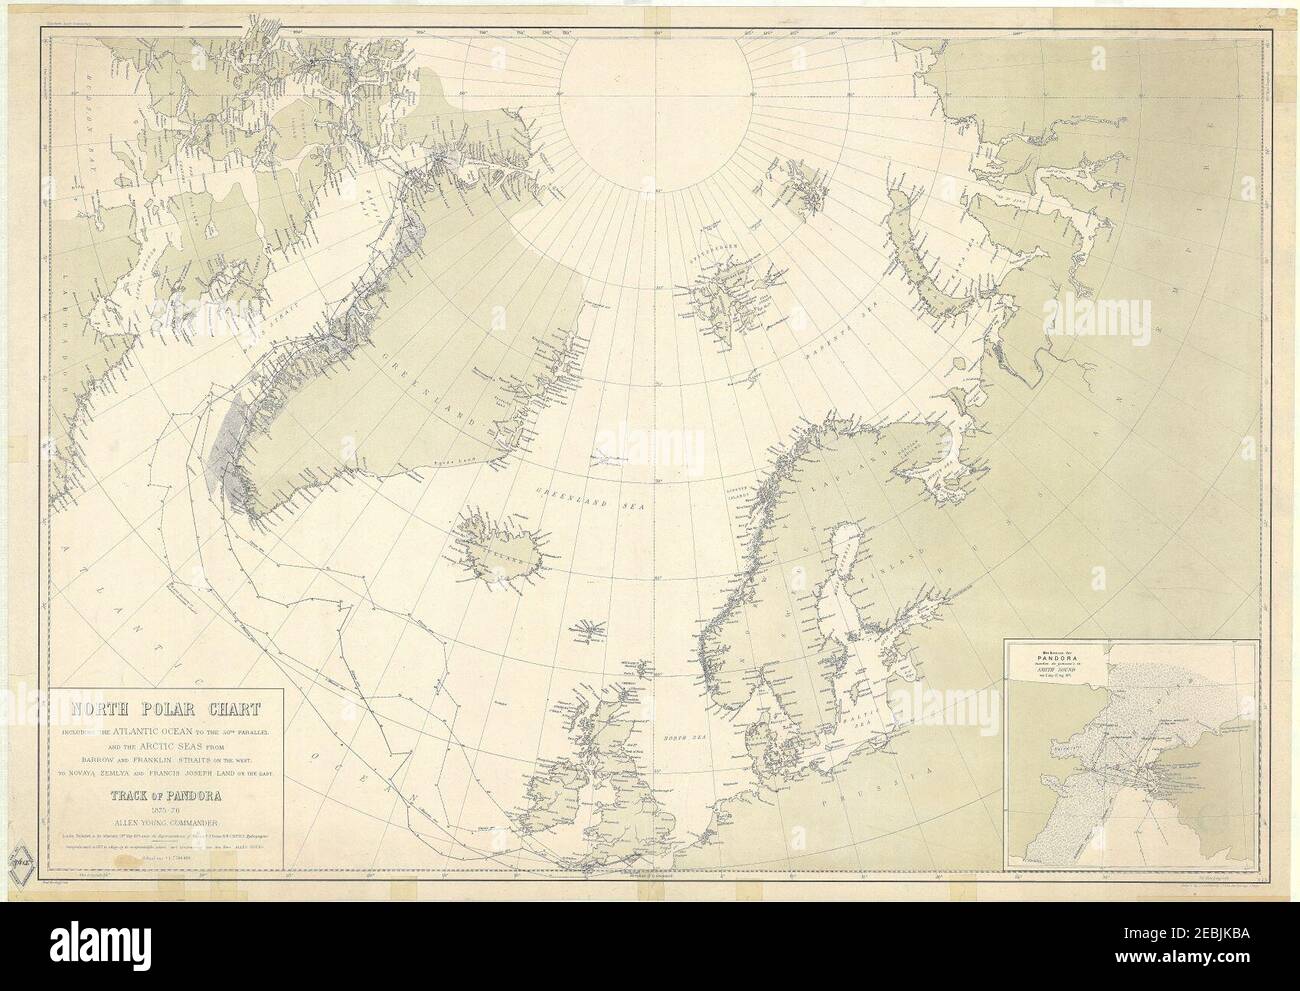 North Polar Chart, including the Atlantic Ocean to the 50th Parallel and the Arctic Seas from Barrow and Franklin Straits on the West, to Novaya Zemlya and Francis Joseph Land on the East - UvA-BC OTM HB-KZL 65 03 24. Stock Photo